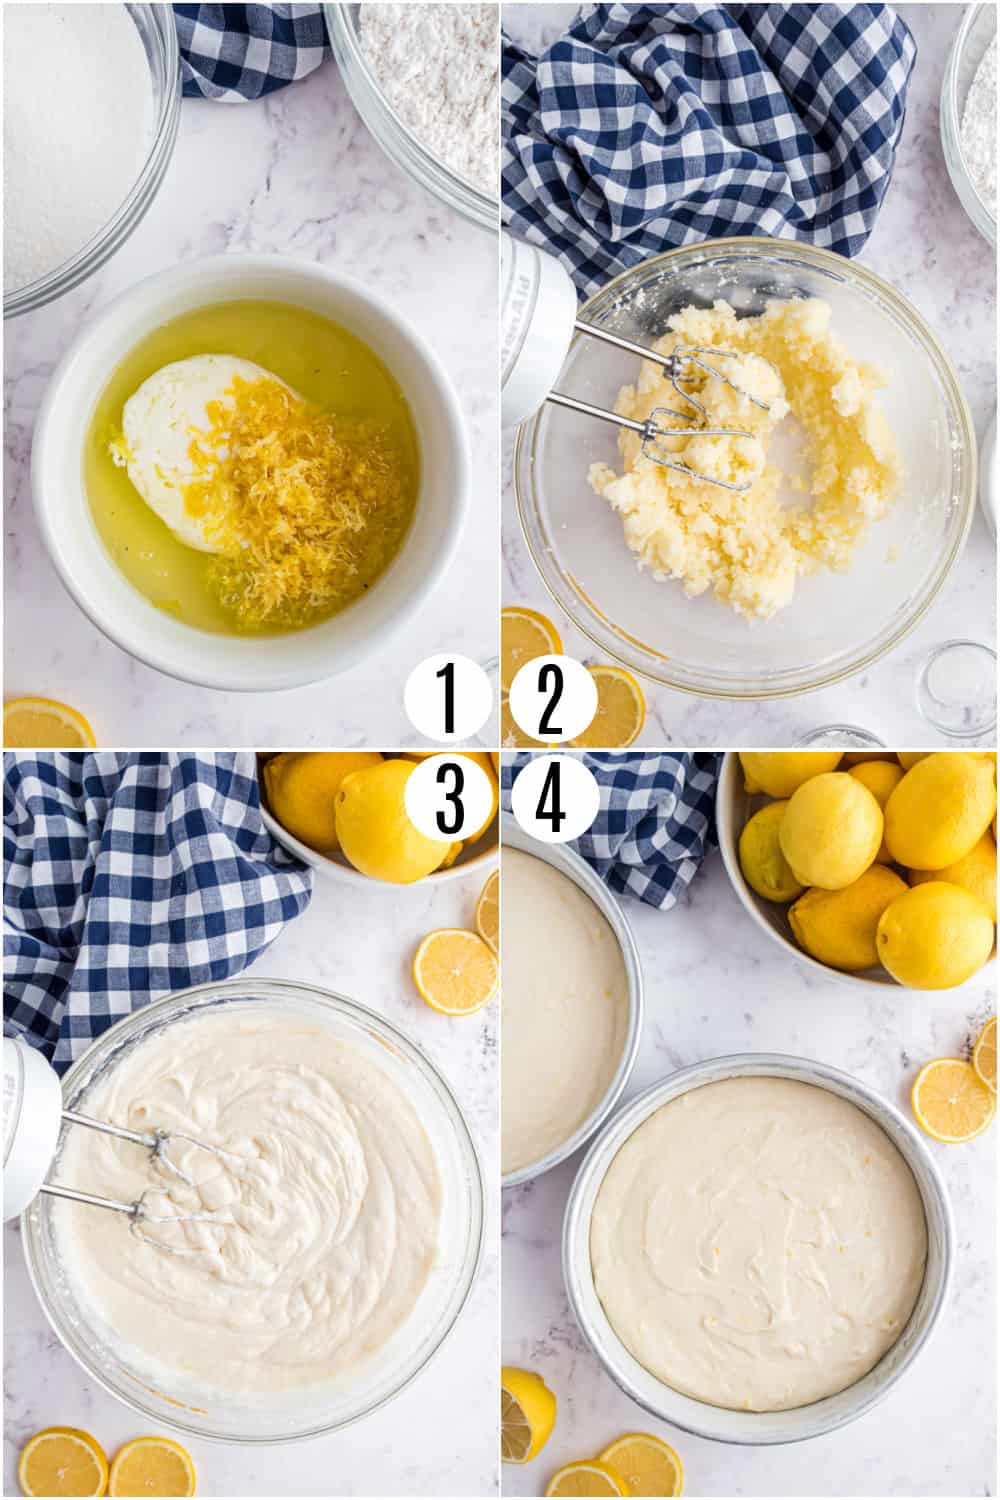 Step by step photos showing how to make a lemon layer cake.